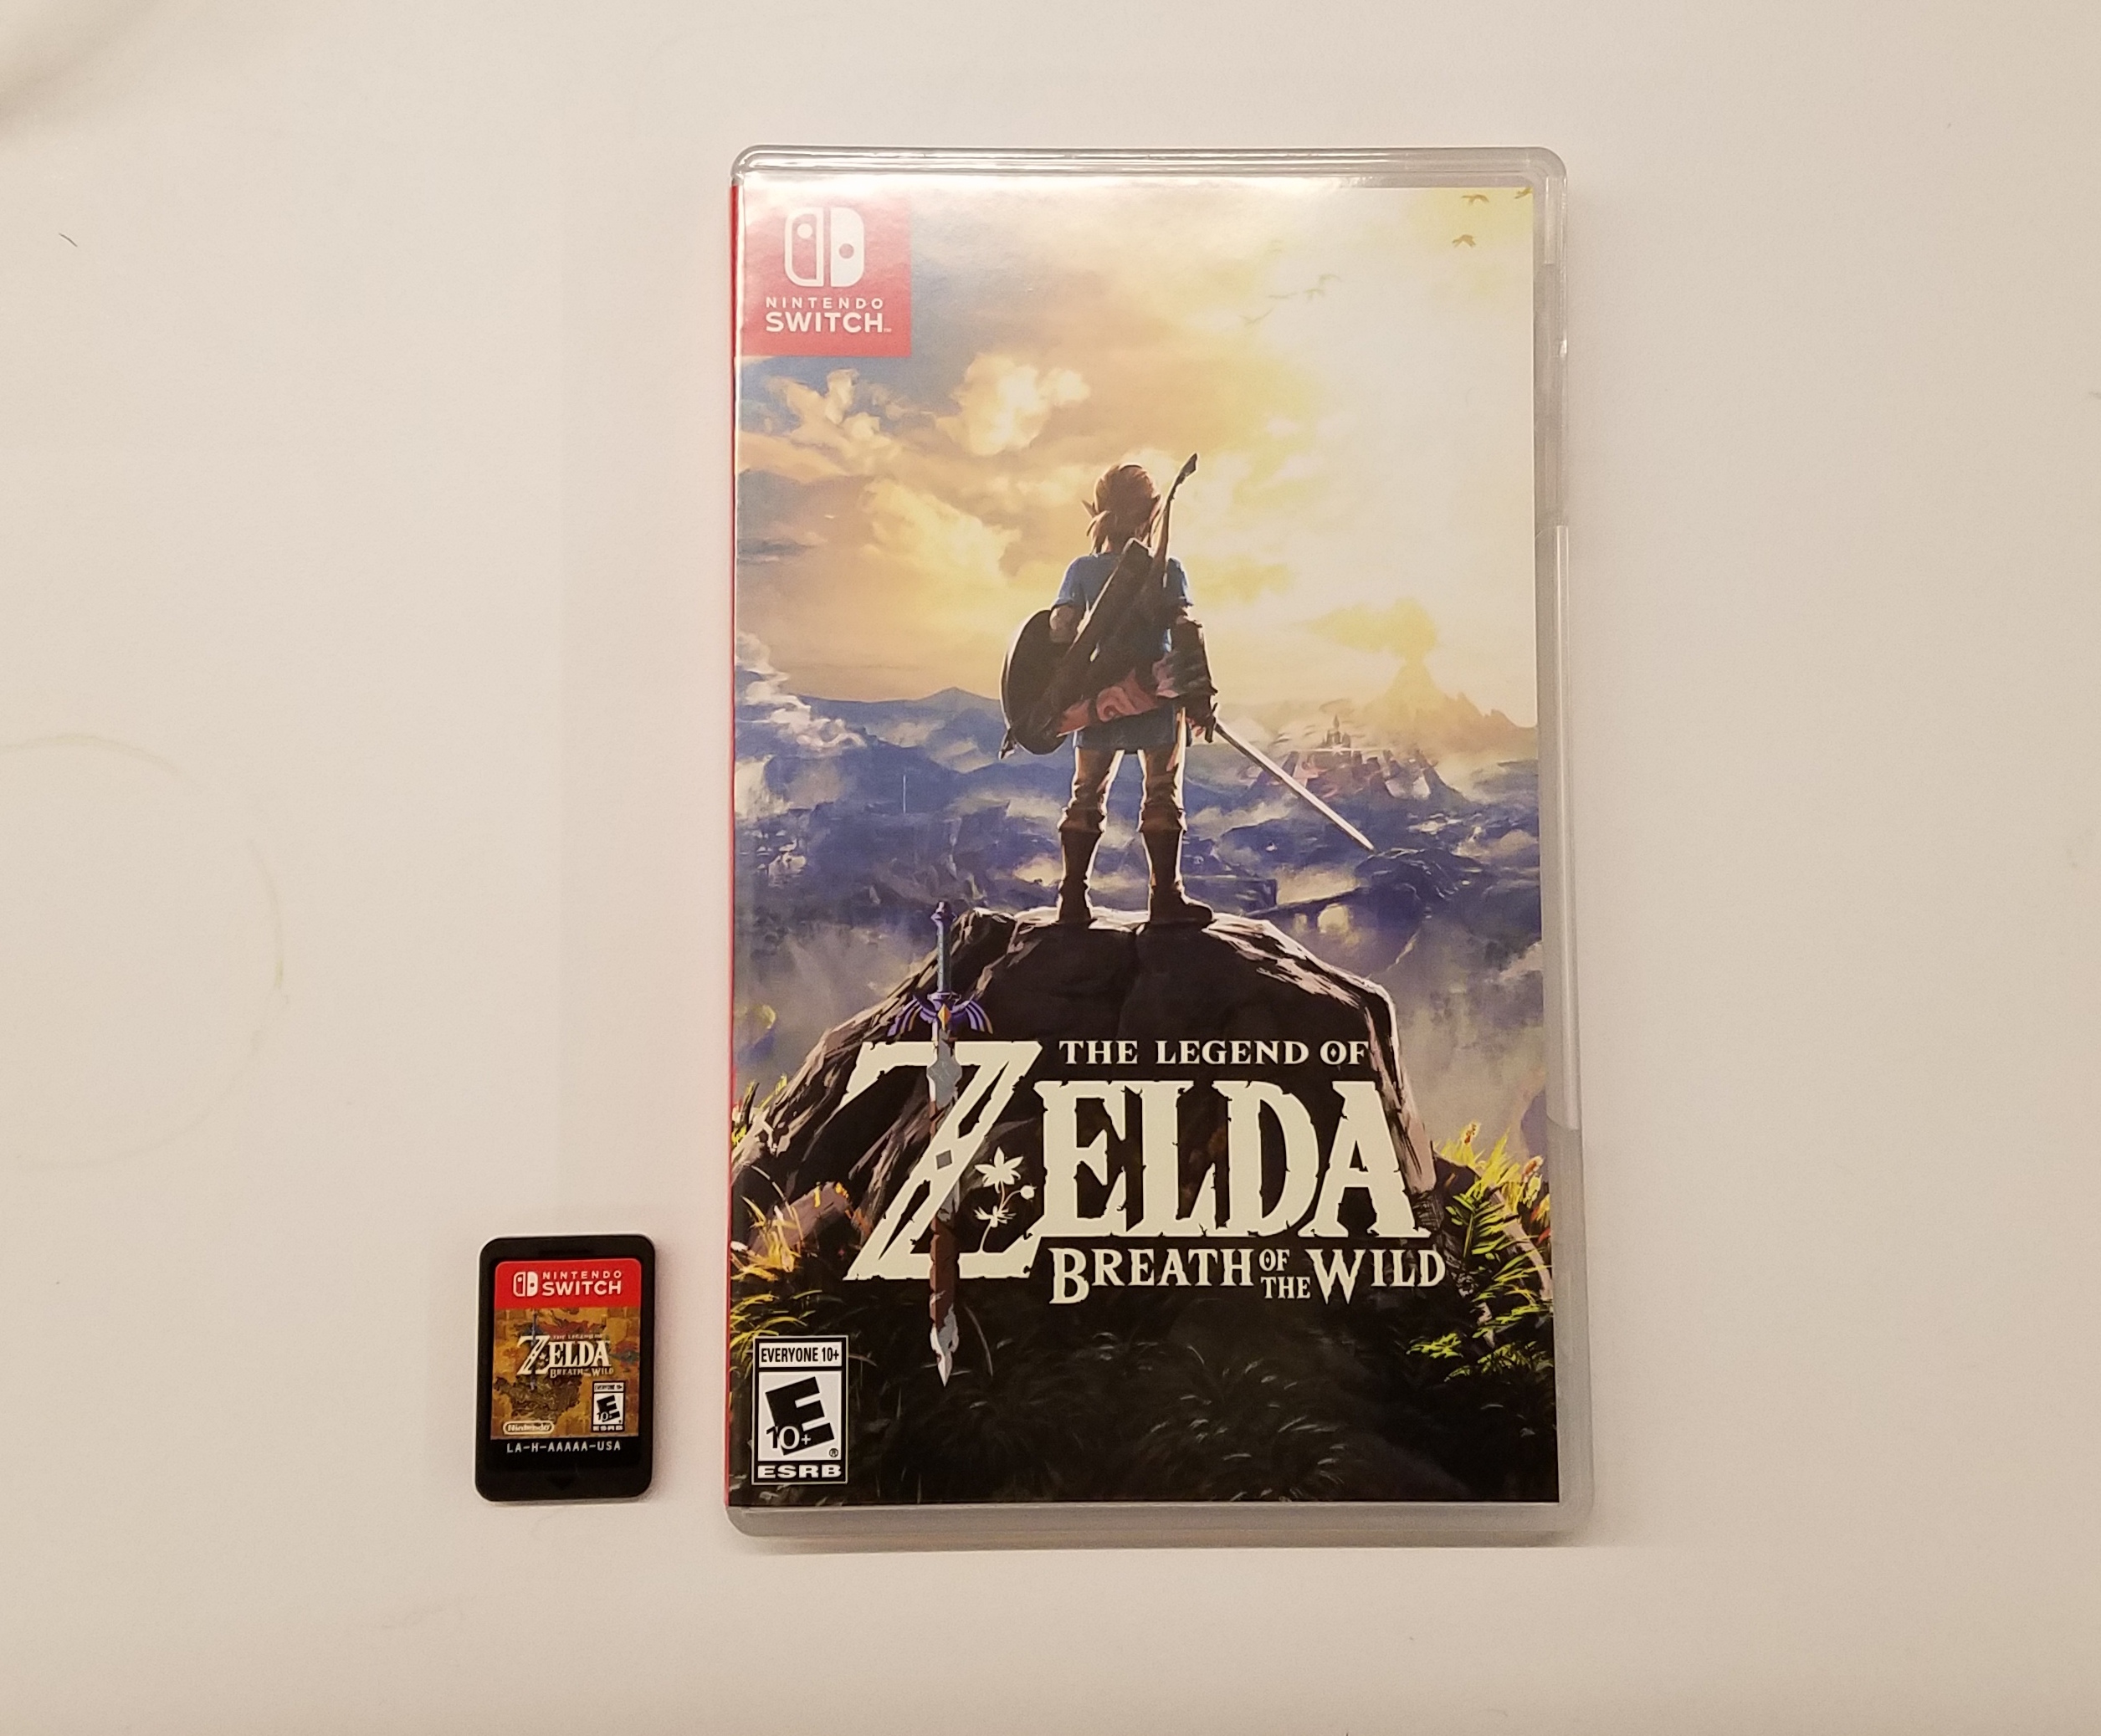 Can I Download Switch Games From Cartridge?